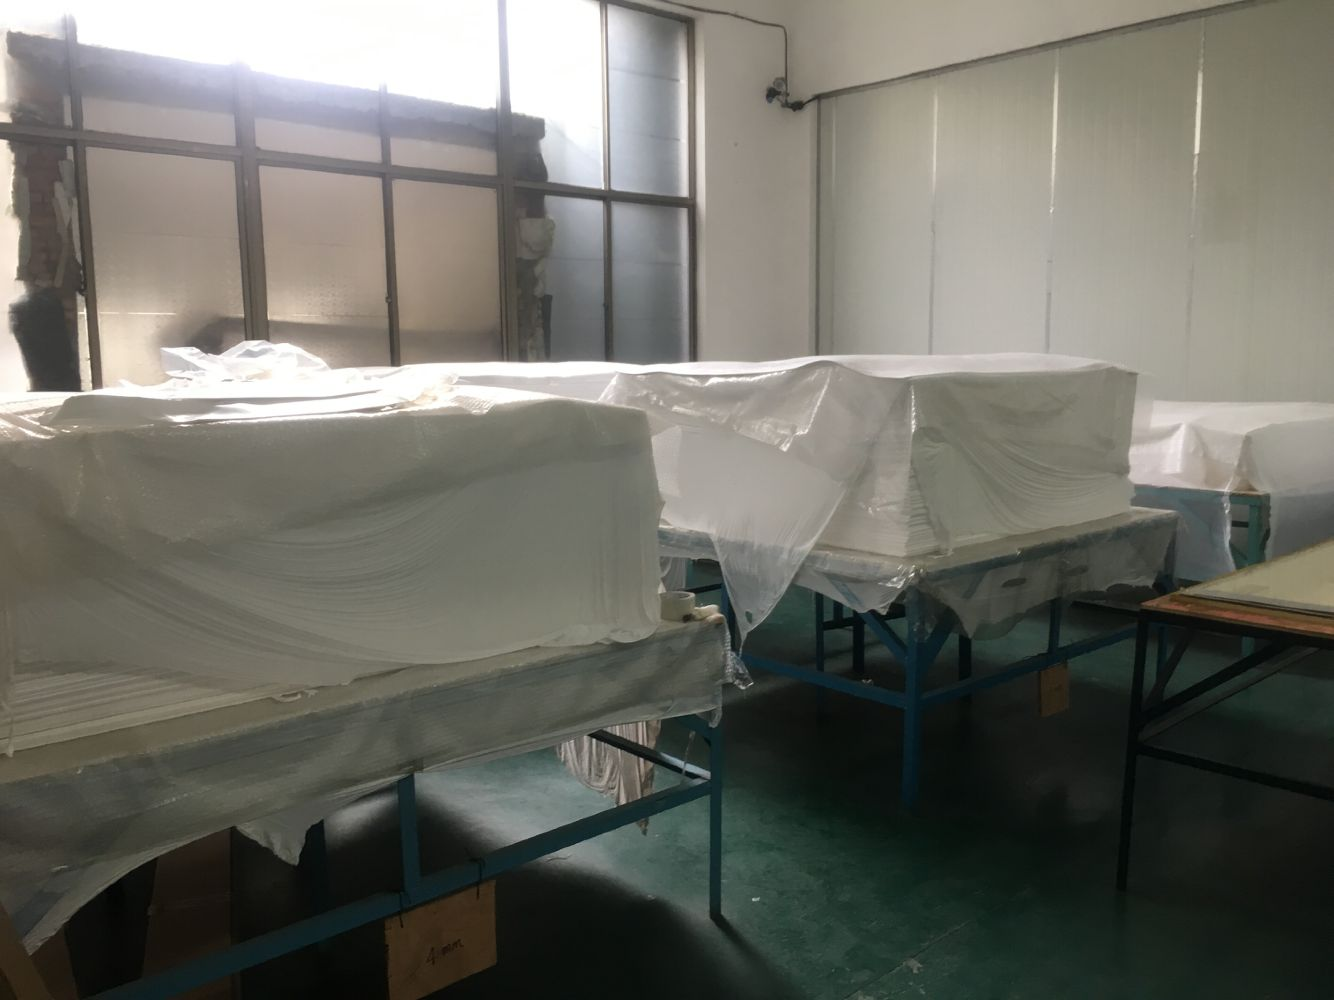 The English Customer Ordered 3000KGS Expanded PTFE Sheet From TOP-SEALING.